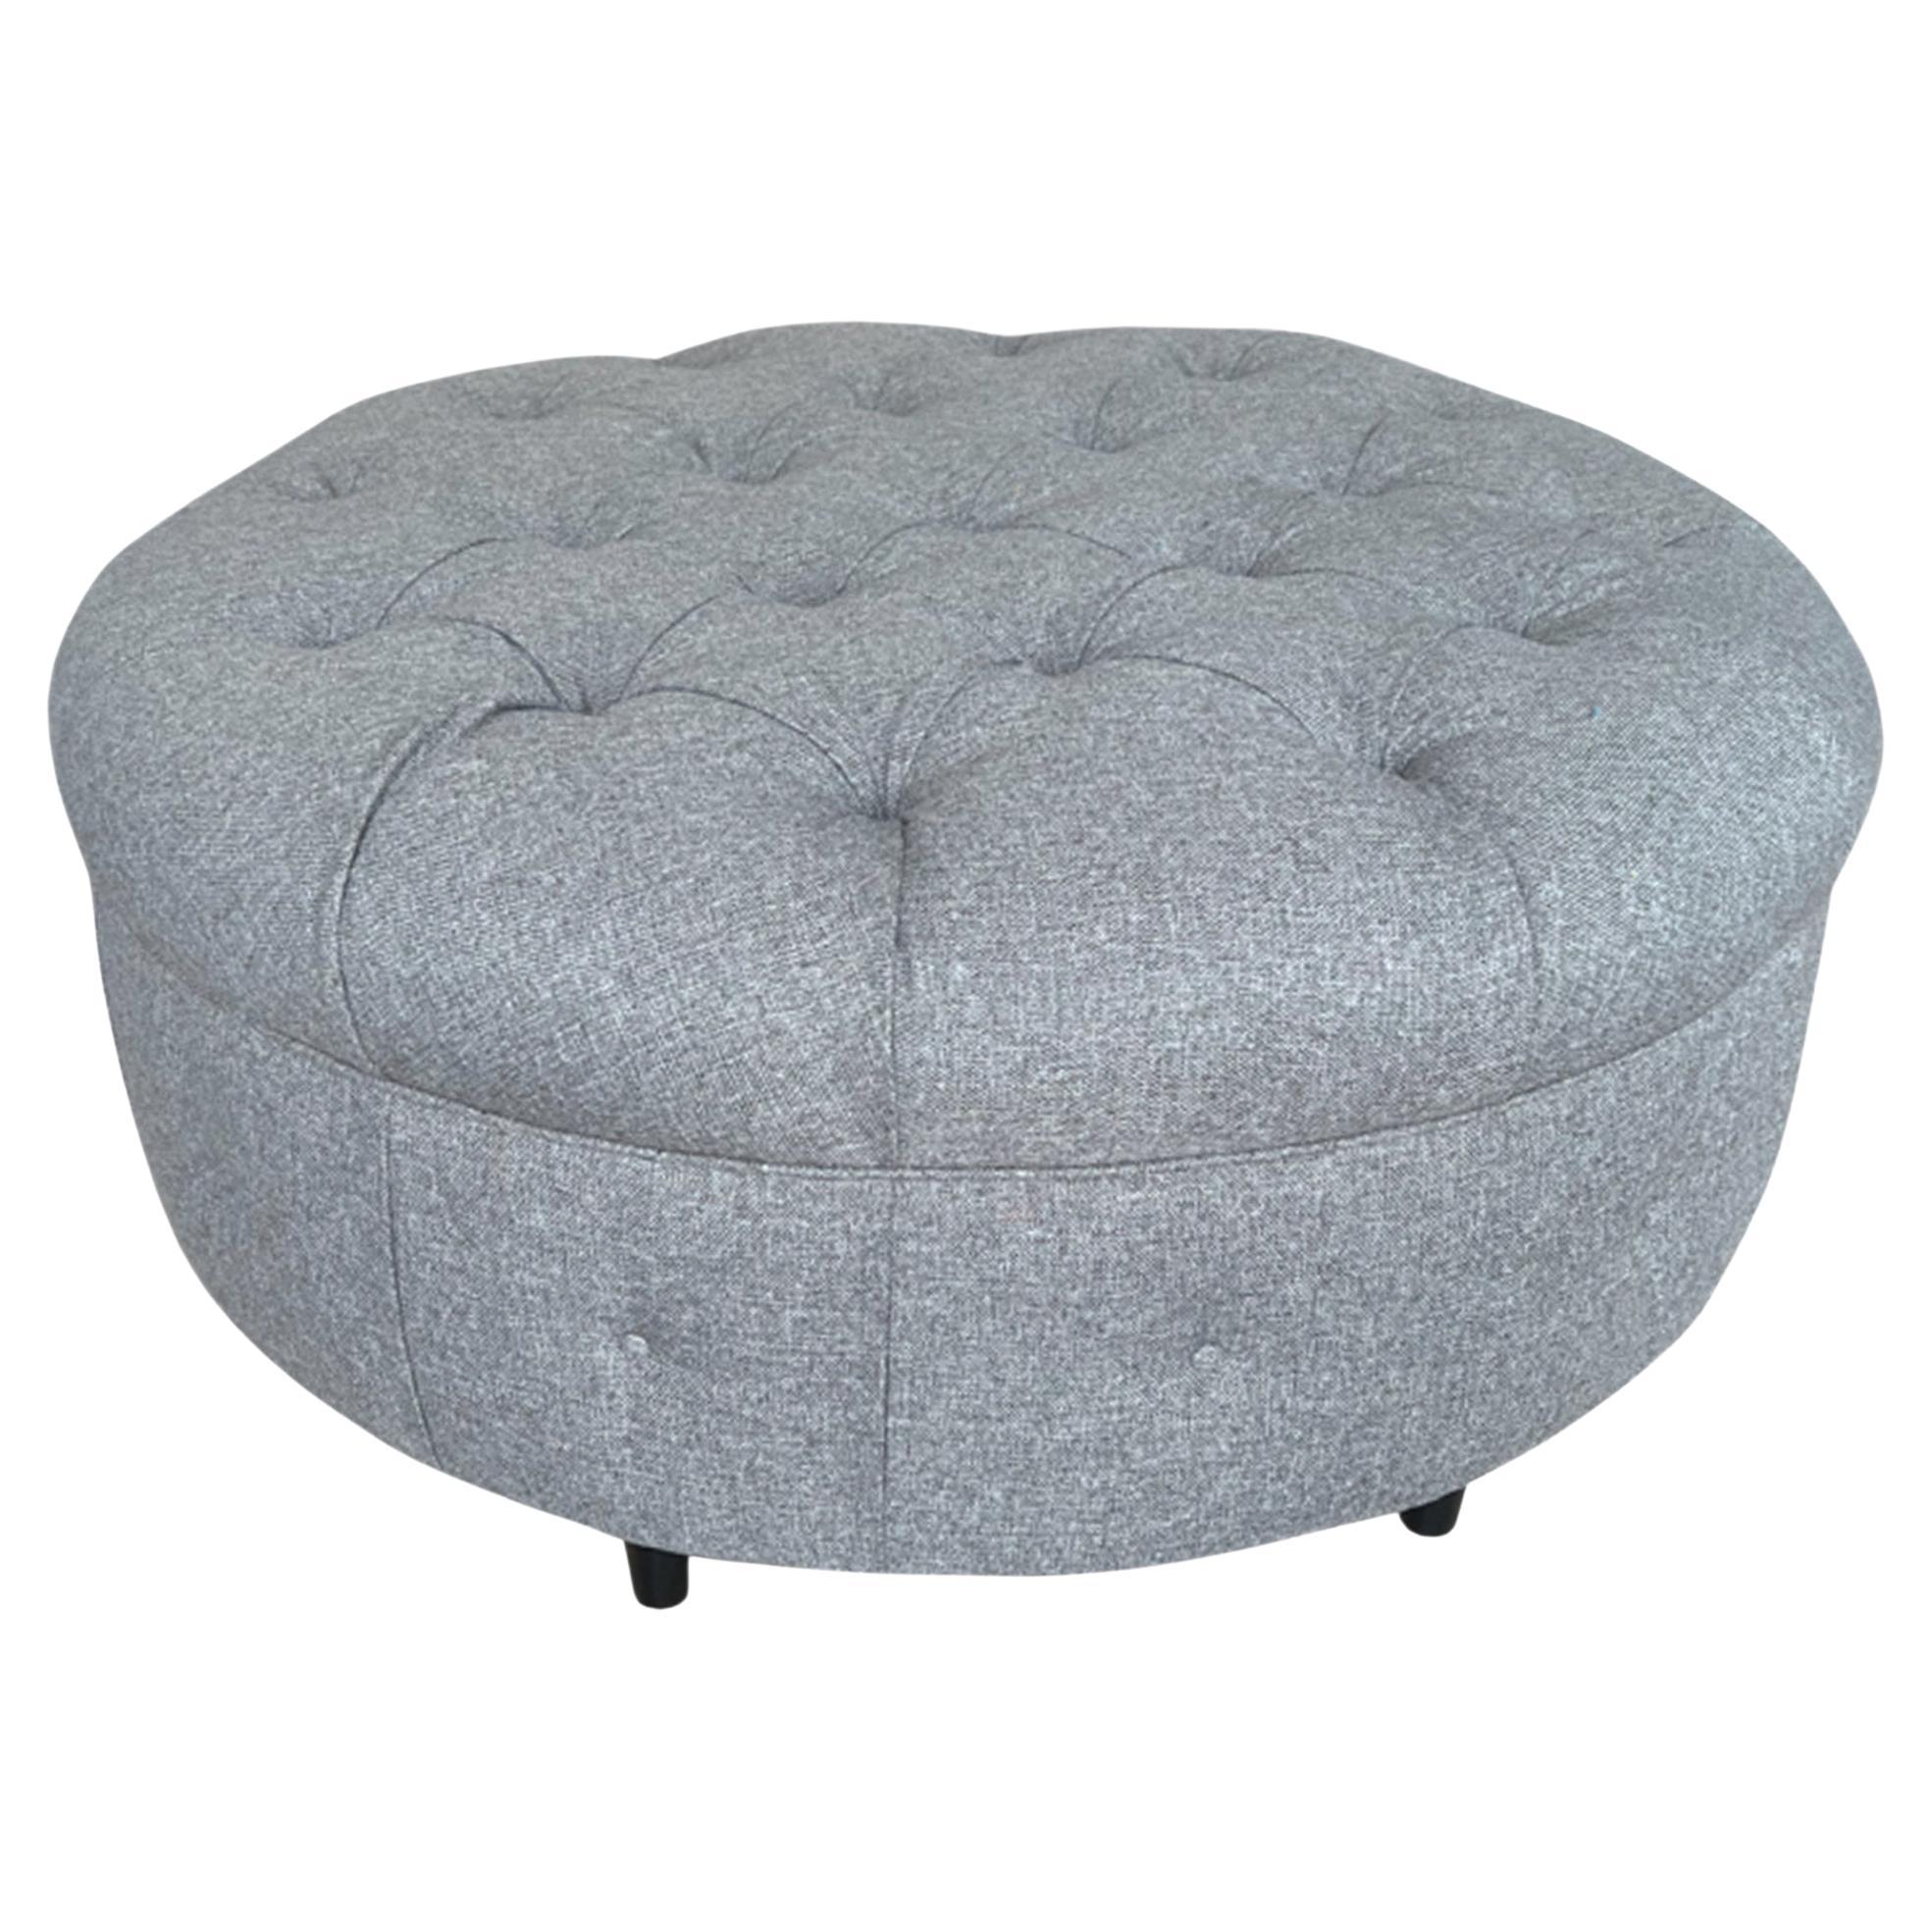 Large Buttoned Ottoman